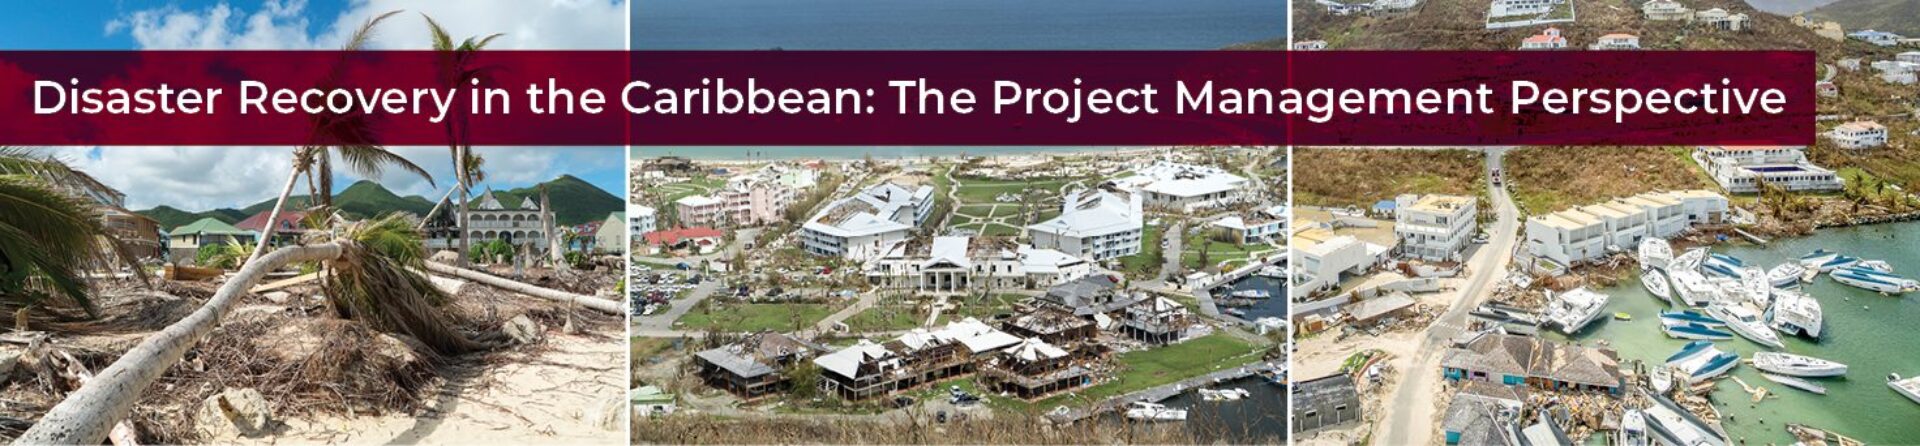 Disaster Recovery in the Caribbean The Project Management Perspective